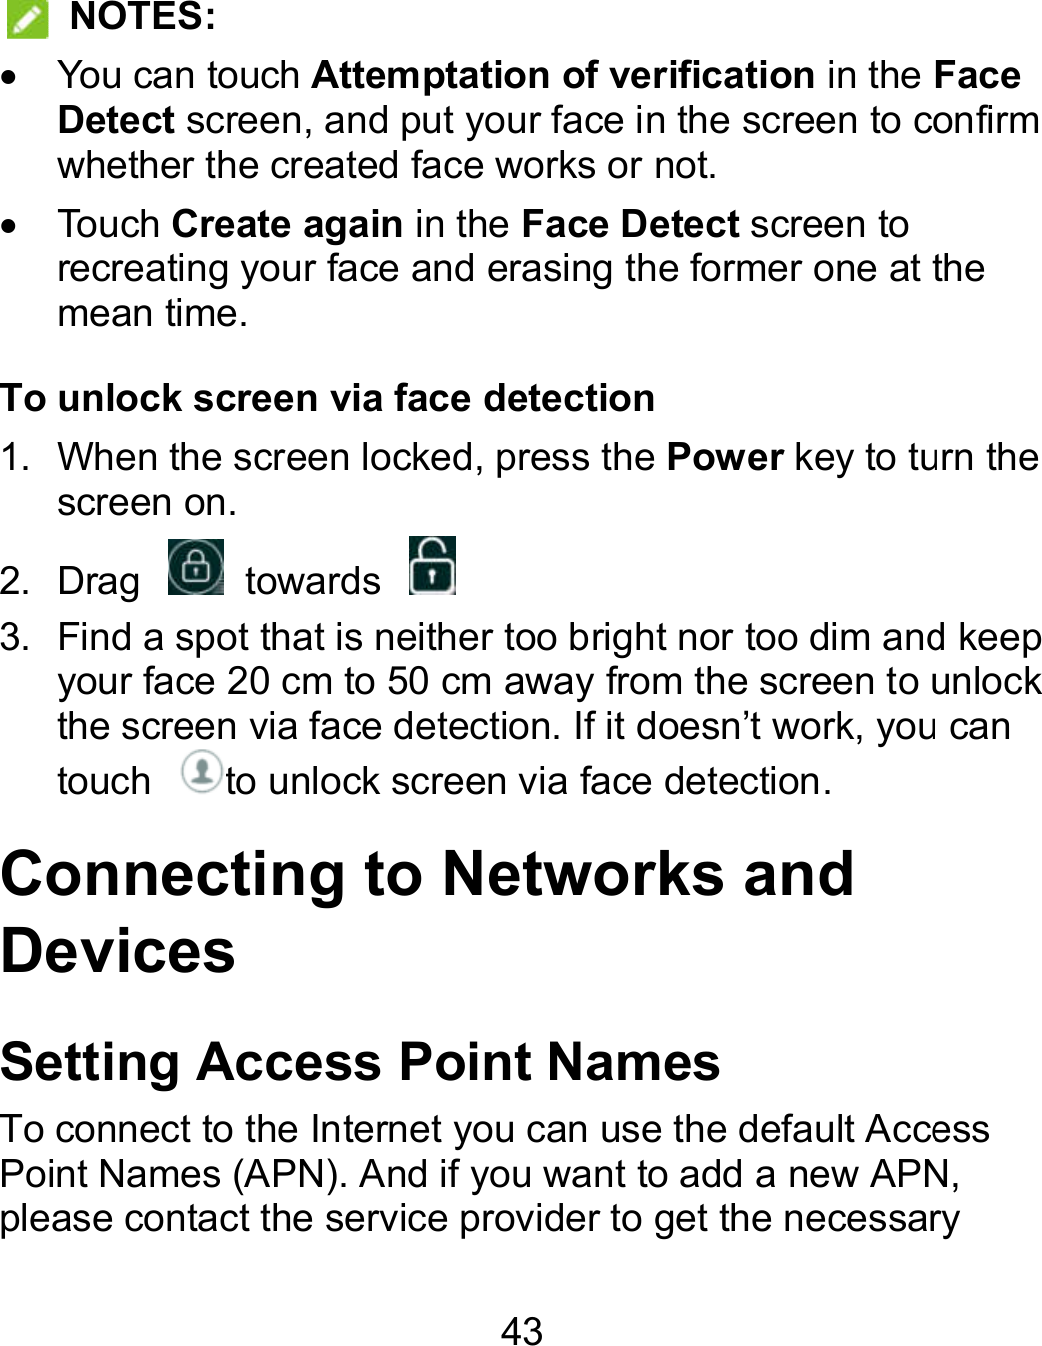 43   NOTES:   You can touch Attemptation of verification in the Face Detect screen, and put your face in the screen to confirm whether the created face works or not.   Touch Create again in the Face Detect screen to recreating your face and erasing the former one at the mean time. To unlock screen via face detection 1.  When the screen locked, press the Power key to turn the screen on. 2.  Drag    towards   3. Find a spot that is neither too bright nor too dim and keep your face 20 cm to 50 cm away from the screen to unlock the screen via face detection. If it doesn’t work, you can touch  to unlock screen via face detection. Connecting to Networks and Devices Setting Access Point Names To connect to the Internet you can use the default Access Point Names (APN). And if you want to add a new APN, please contact the service provider to get the necessary Face , and put your face in the screen to confirm recreating your face and erasing the former one at the to turn the Find a spot that is neither too bright nor too dim and keep your face 20 cm to 50 cm away from the screen to unlock t work, you can To connect to the Internet you can use the default Access Point Names (APN). And if you want to add a new APN, get the necessary 